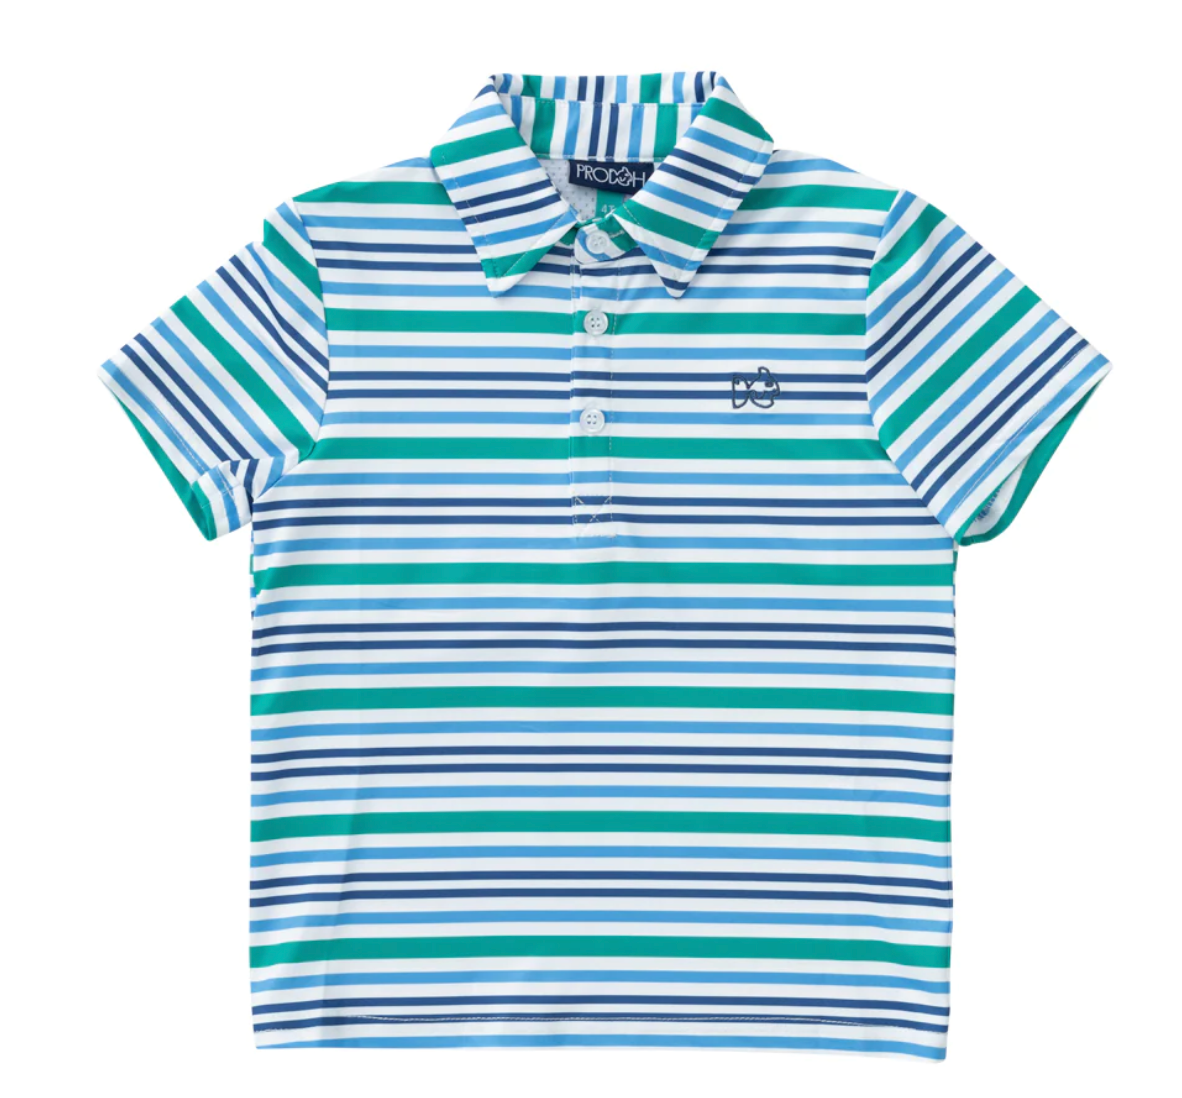 Pro Performance Polo by Prodoh in a green and blue stripe pattern for boys. 